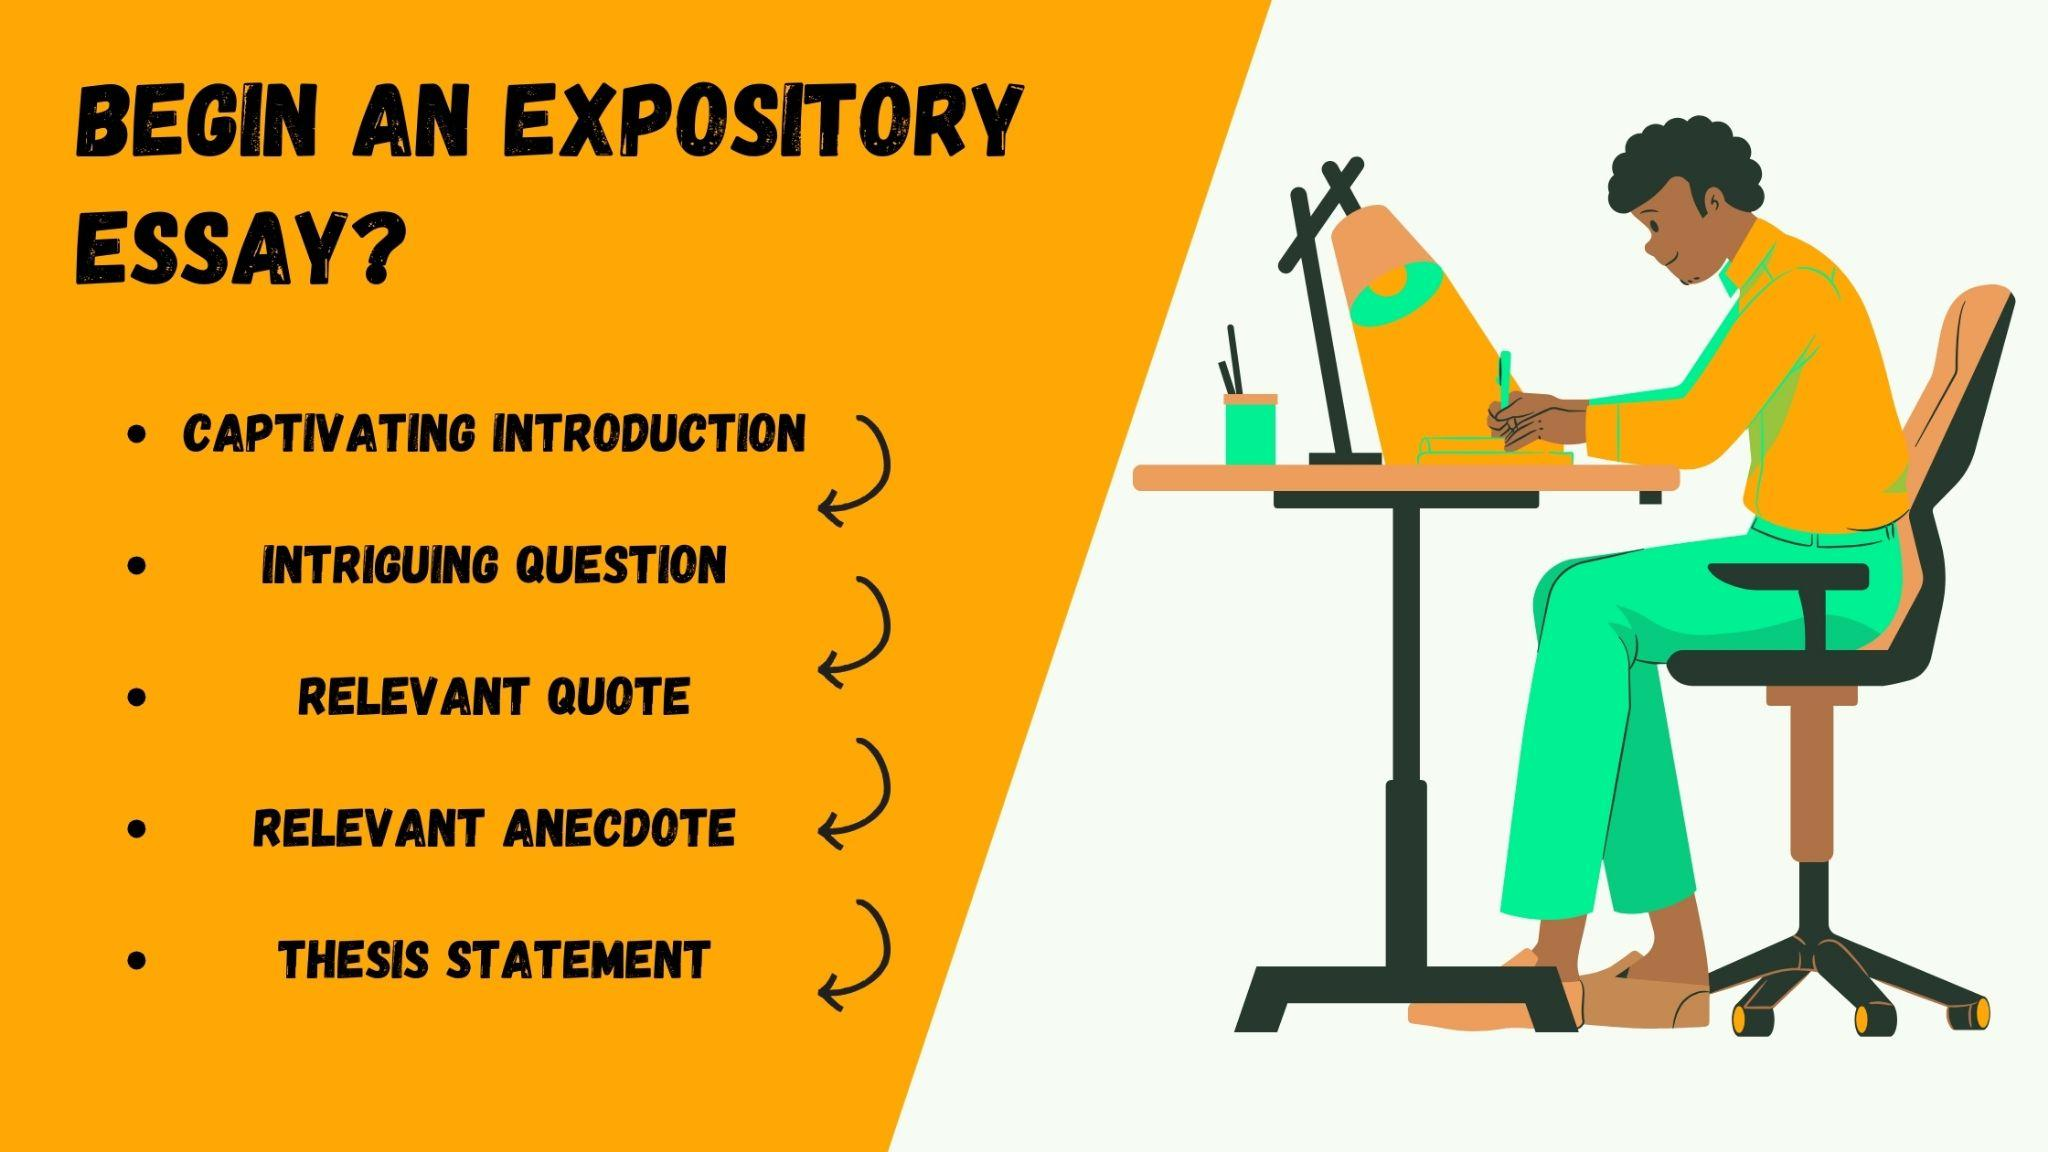 How to start an Expository essay